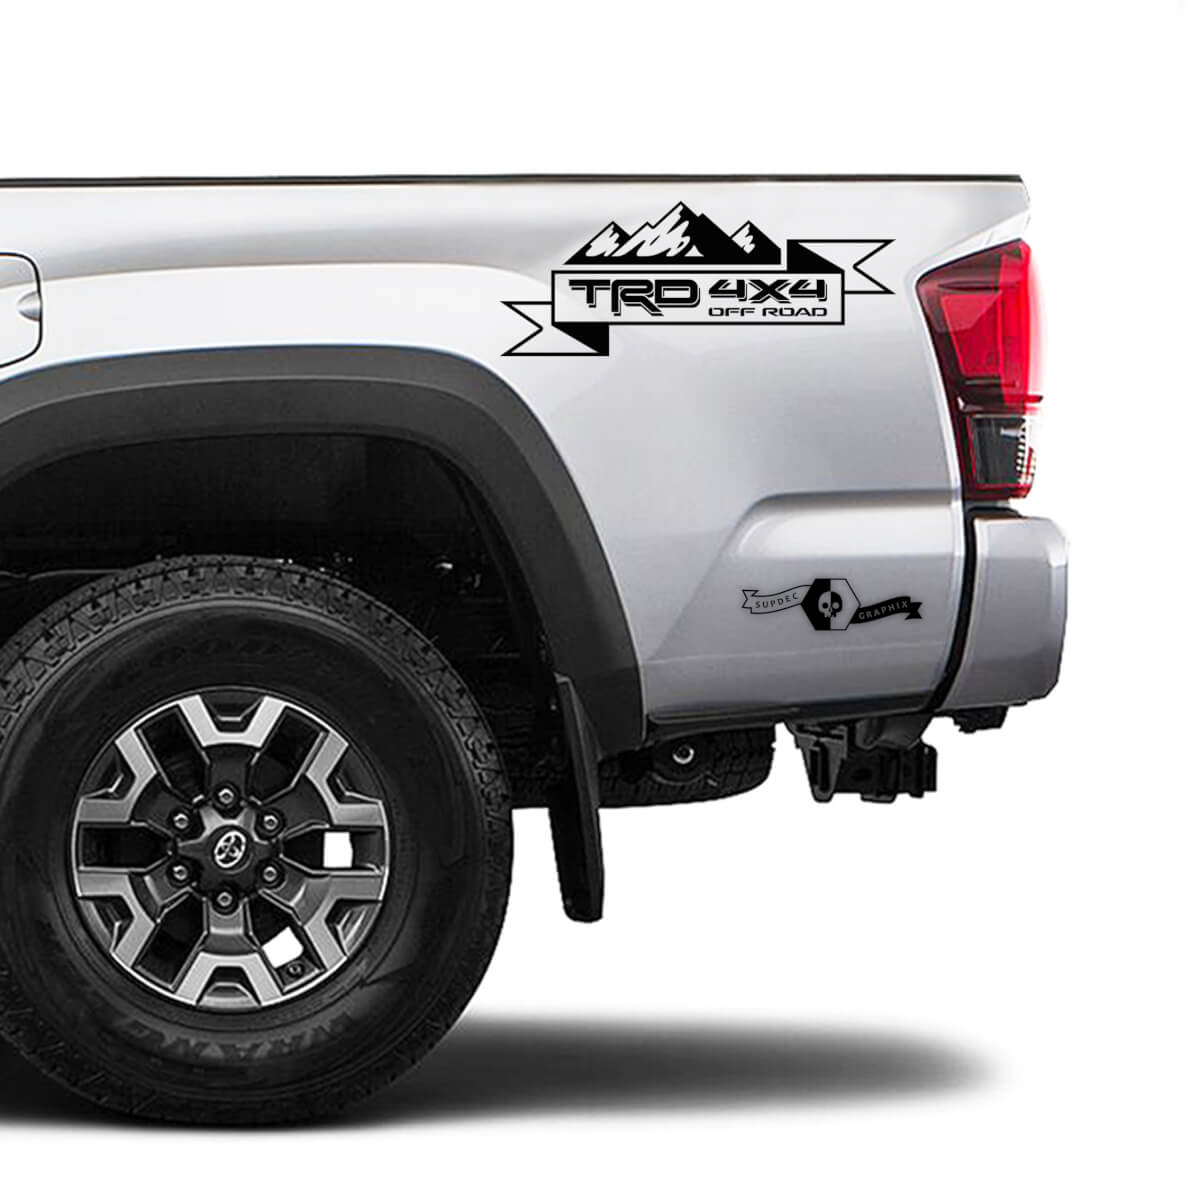 TRD 4x4 Off Road TOYOTA Mountain Peaks Decals Stickers for Tacoma Tundra 4Runner Hilux side